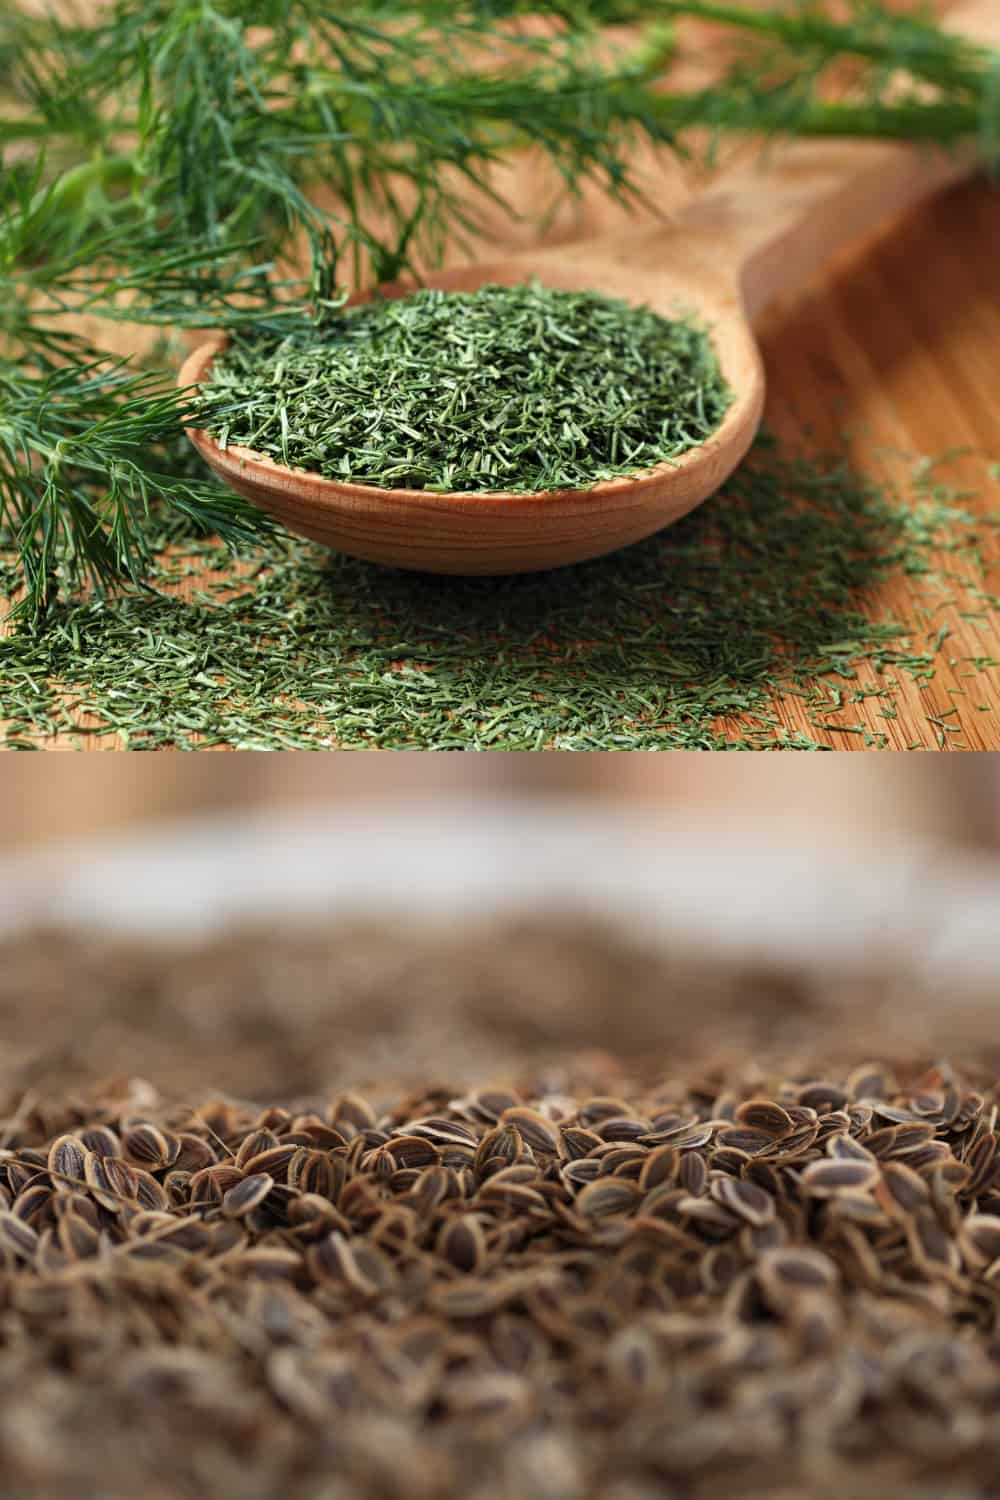 dill weed and dill seed comparison